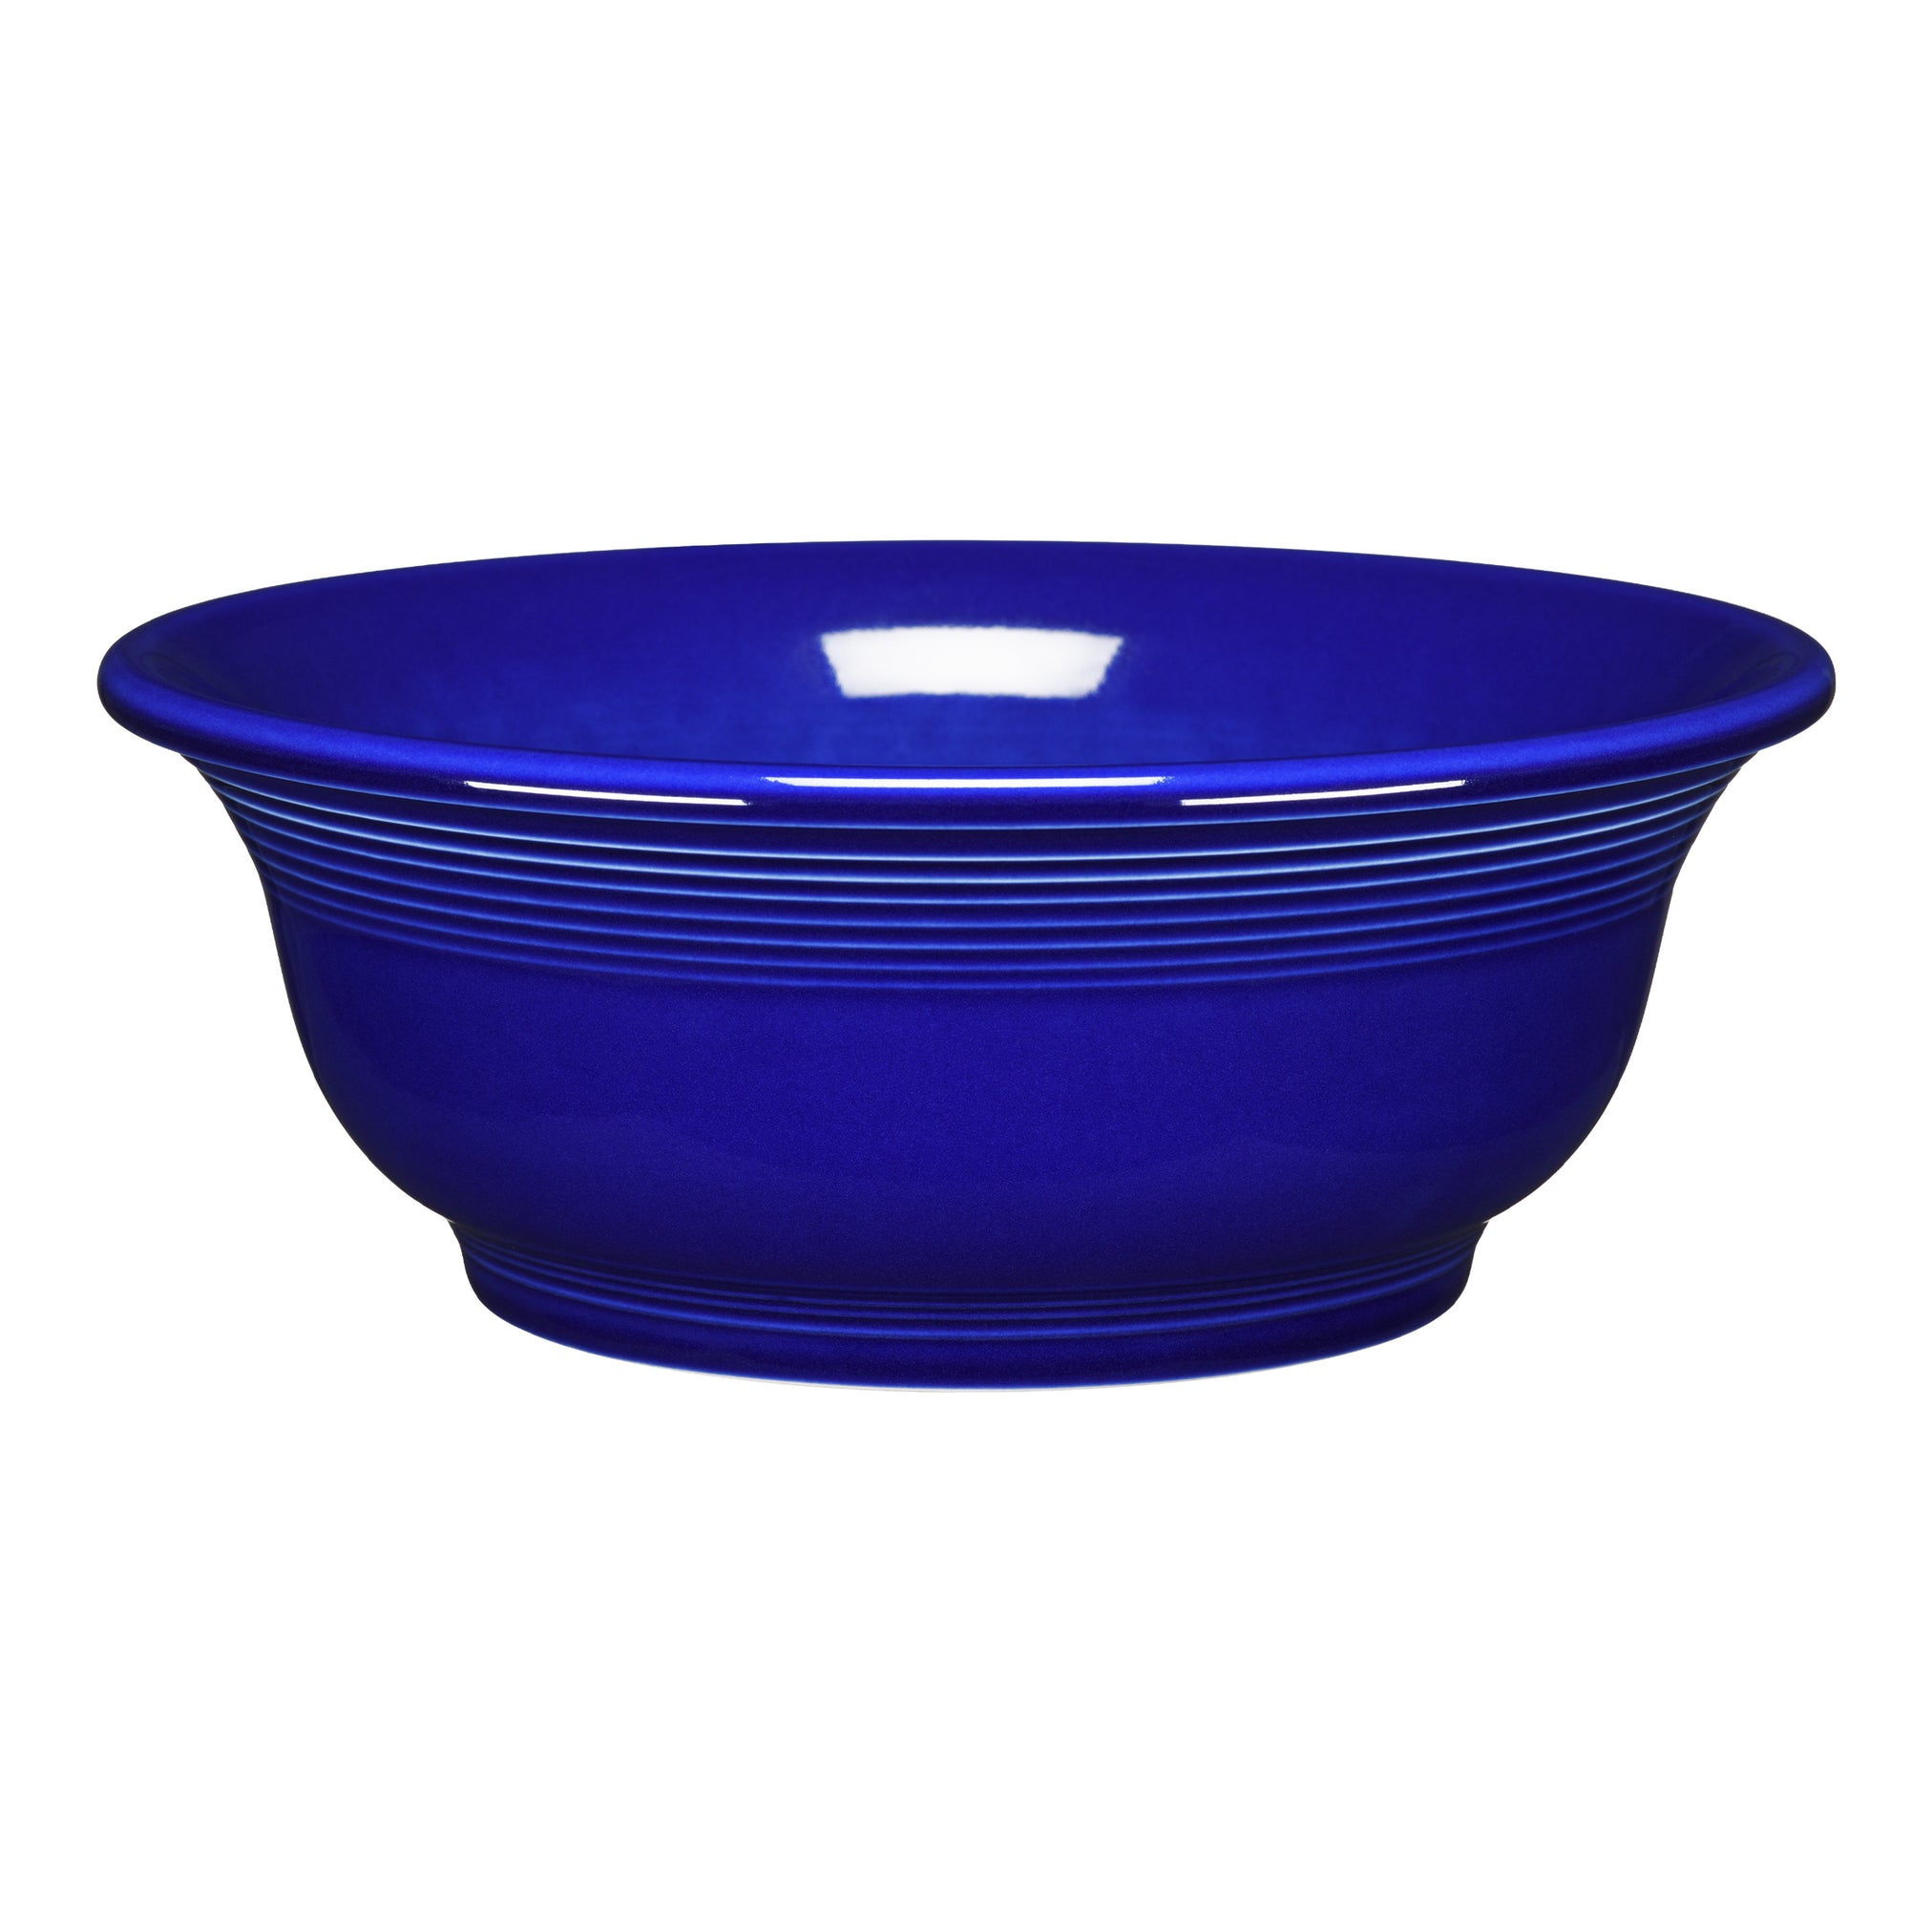 2 Qt. Extra Large Serving Bowl - Turquoise, Fiesta®